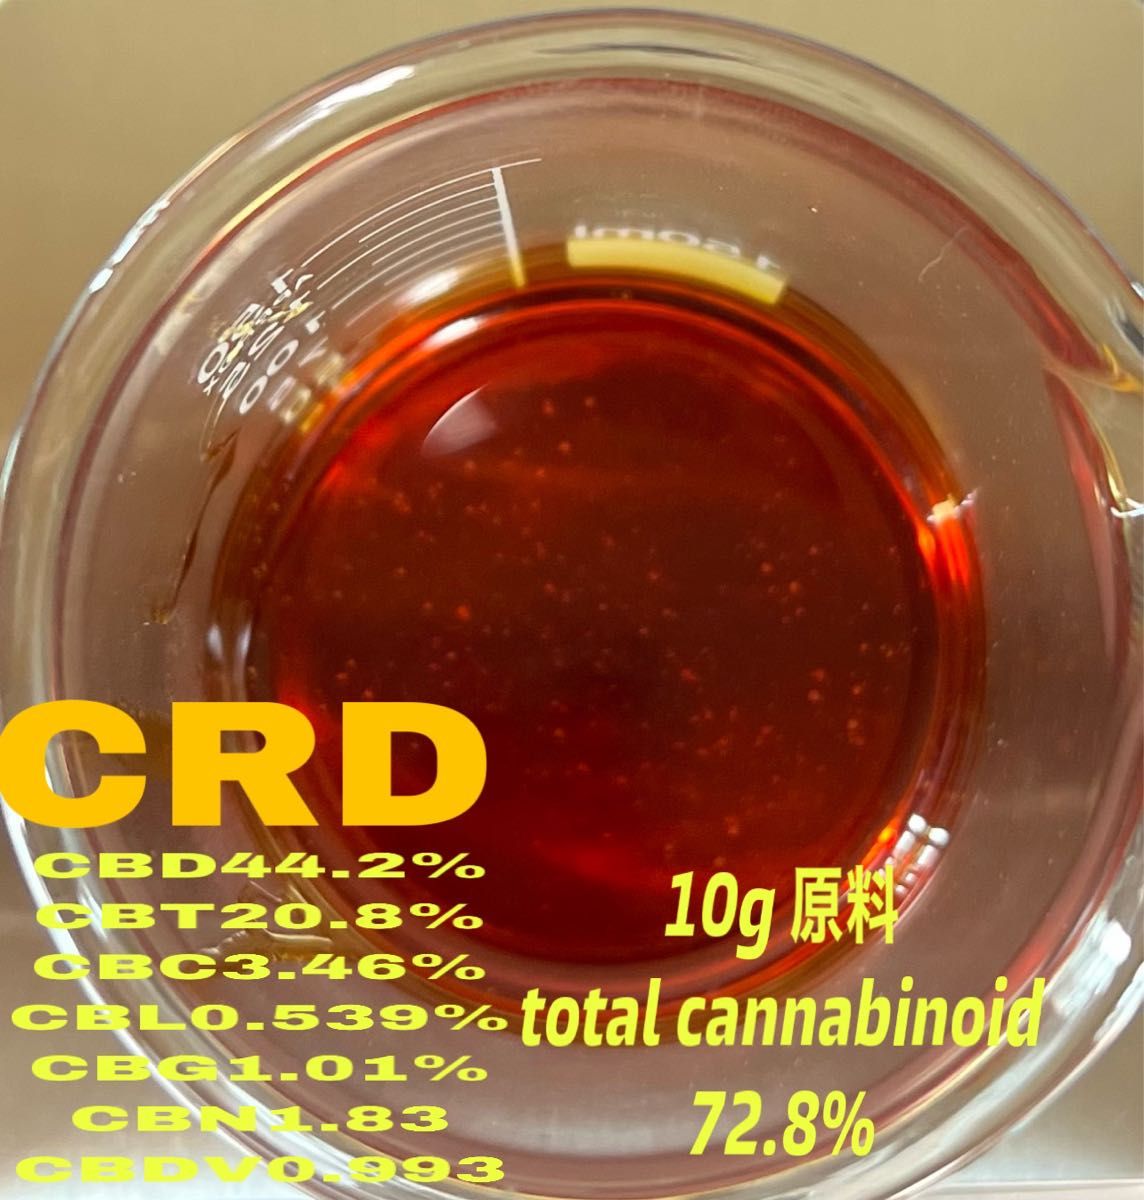 CRD「Crystal Resistant Distillate 」100g 原料｜PayPayフリマ